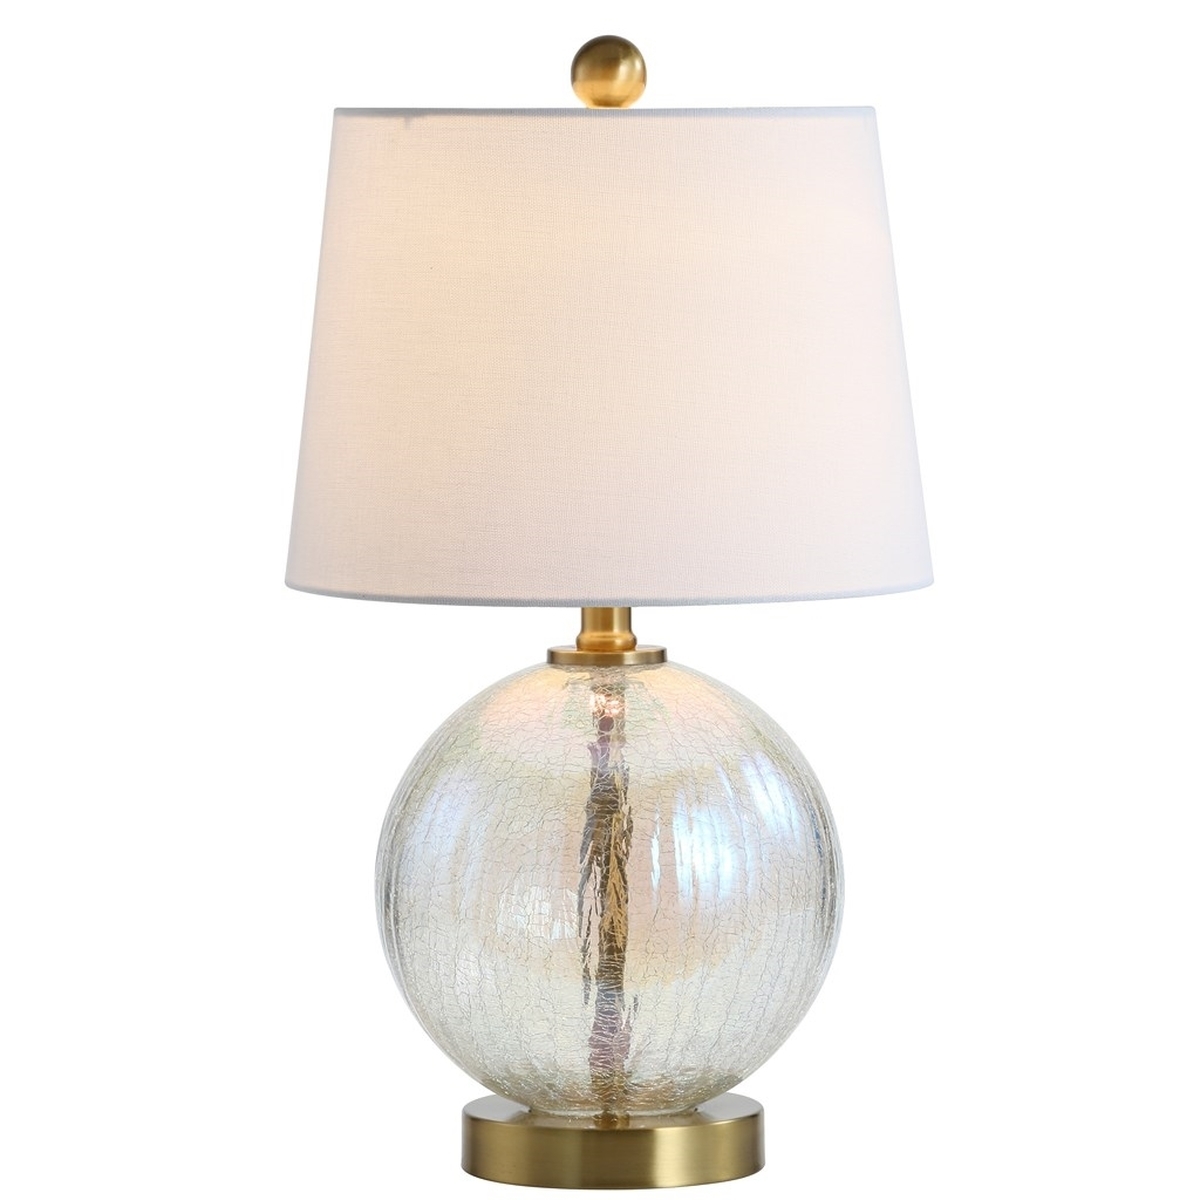 Riglan Table Lamp - Clear/Gold - Arlo Home - Image 1